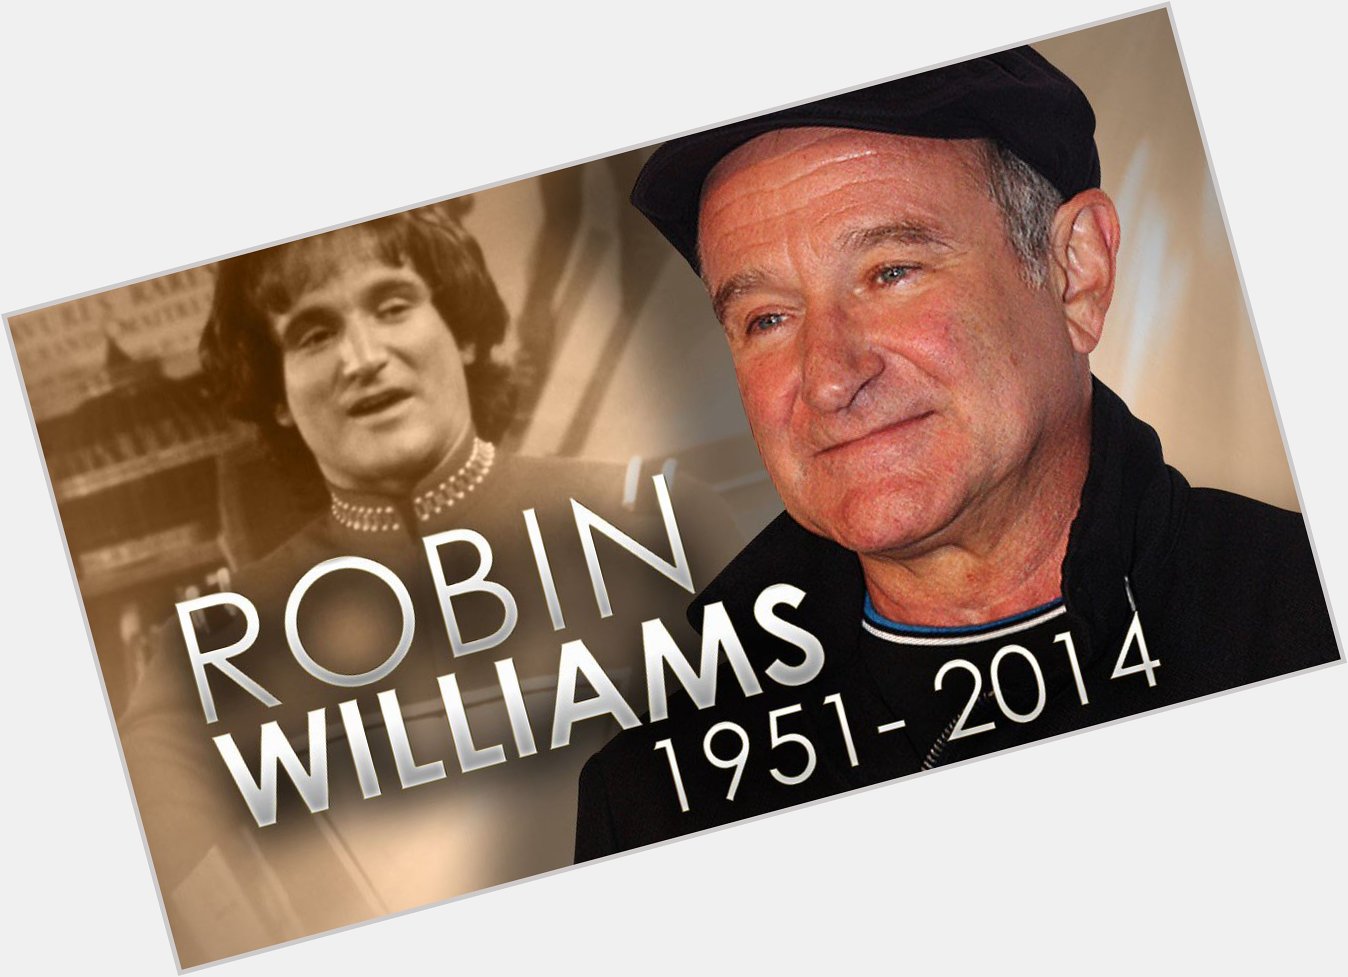 Happy birthday, Robin Williams. The legendary stand-up comedian and actor would have turned 66 years old today. 